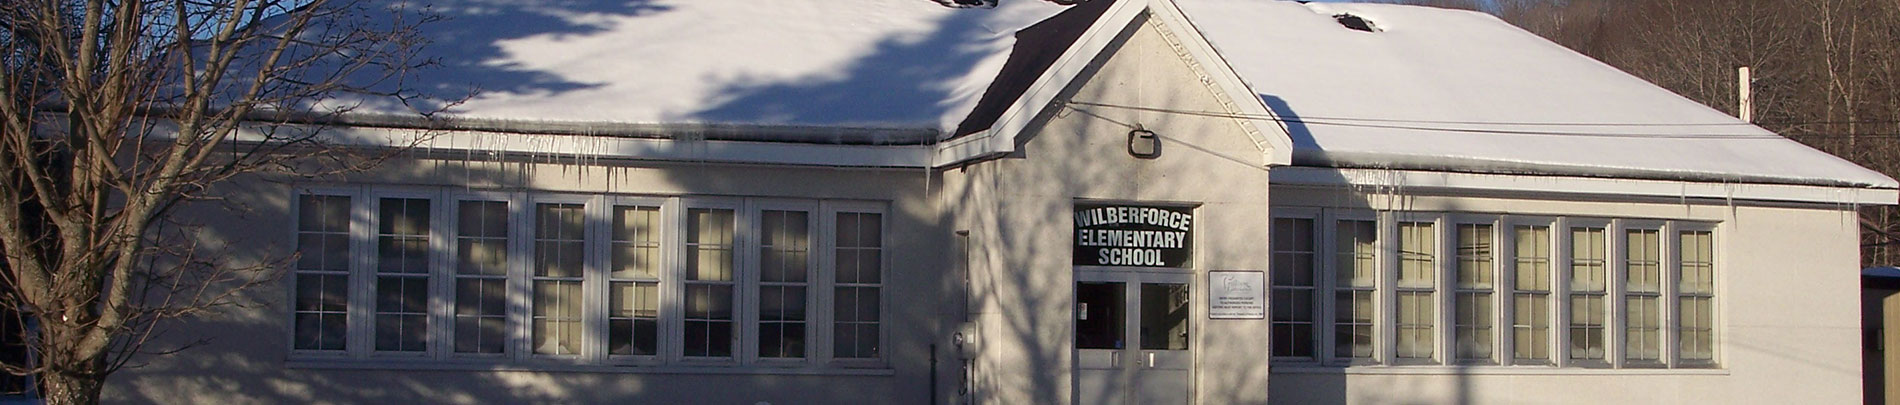 The exterior of Wilberforce Elementary School in the wintertime.